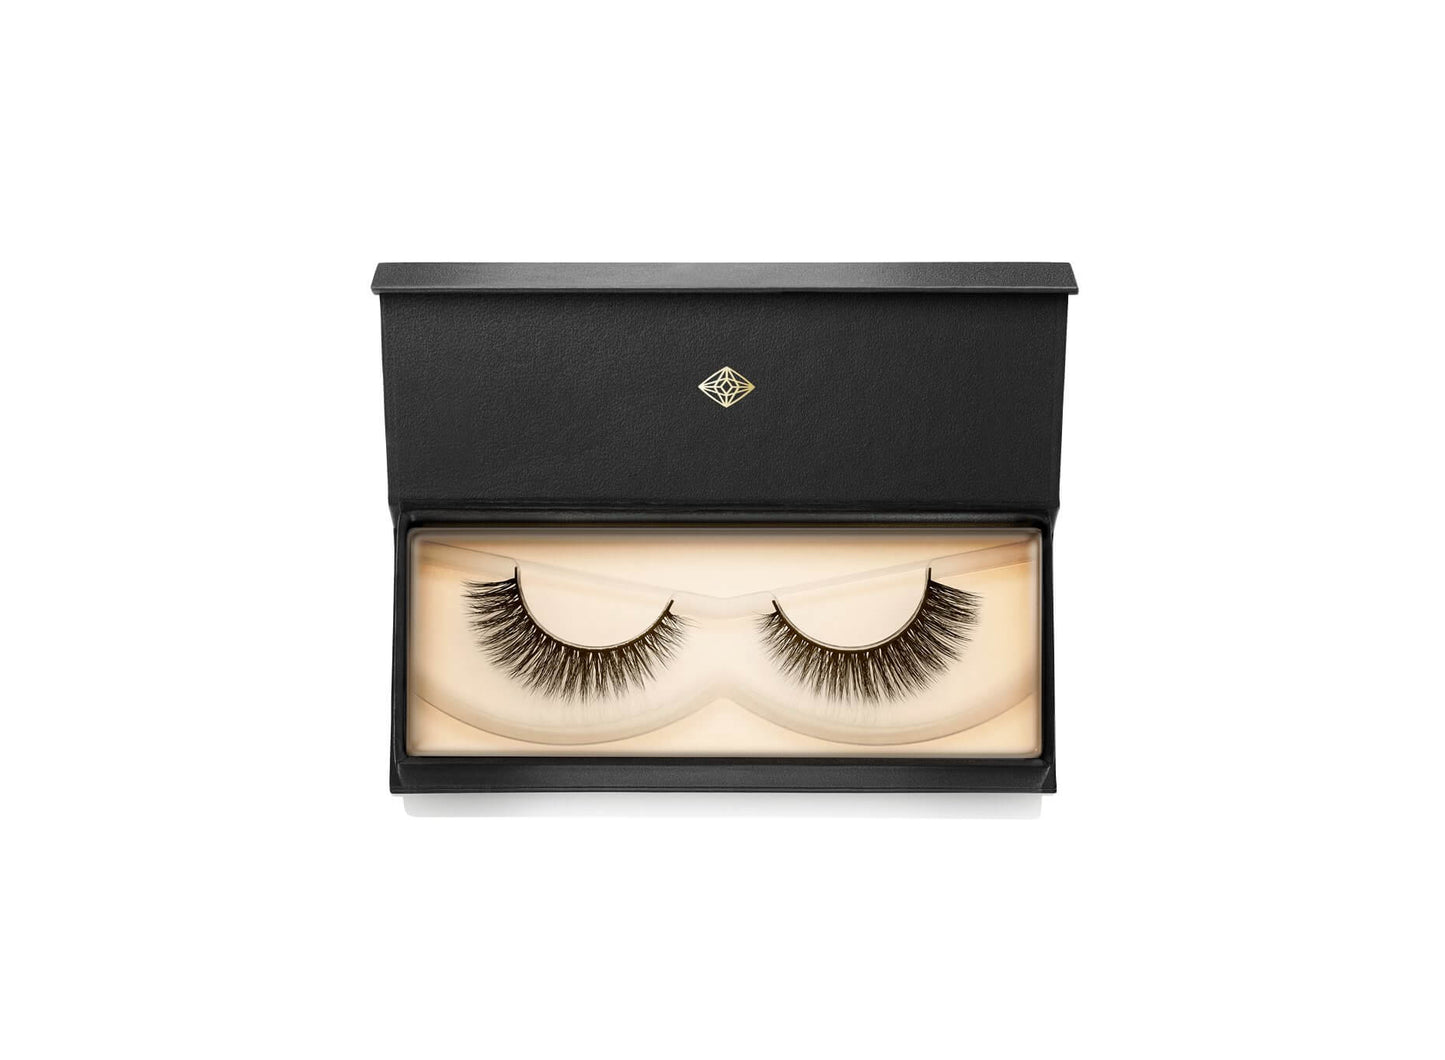 featured-image fluffy false lashes from lash star beauty